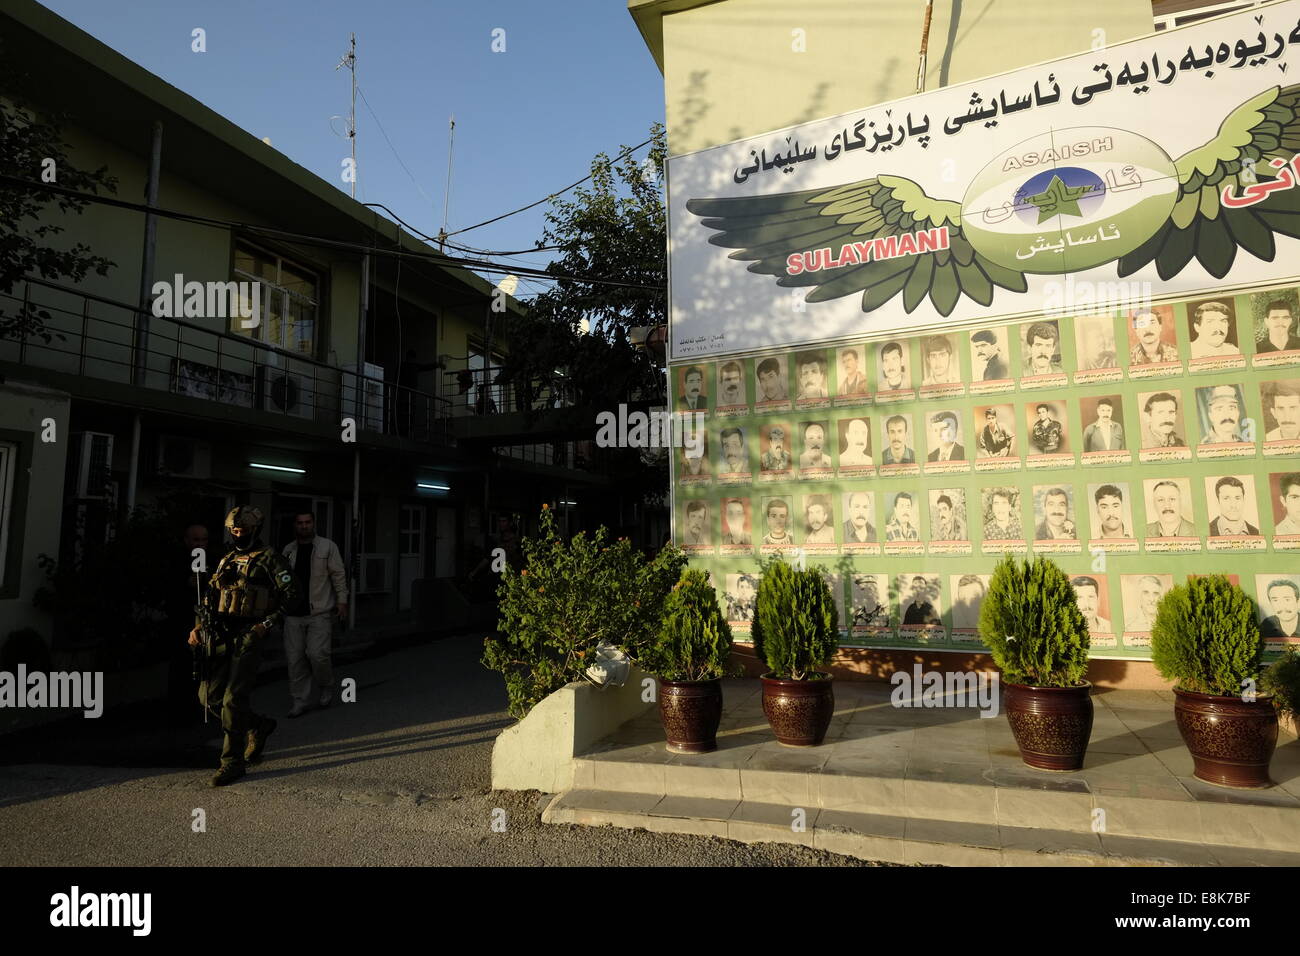 A memorial wall for fallen security personal at the courtyard of the headquarters of the Kurdish intelligence security unit of the Asayiş or Asayish the Kurdish security organization and the primary intelligence agency operating in the Kurdistan region in Iraq. City of Sulaymanieh or Sulaymaniyah Northern Iraq. Stock Photo